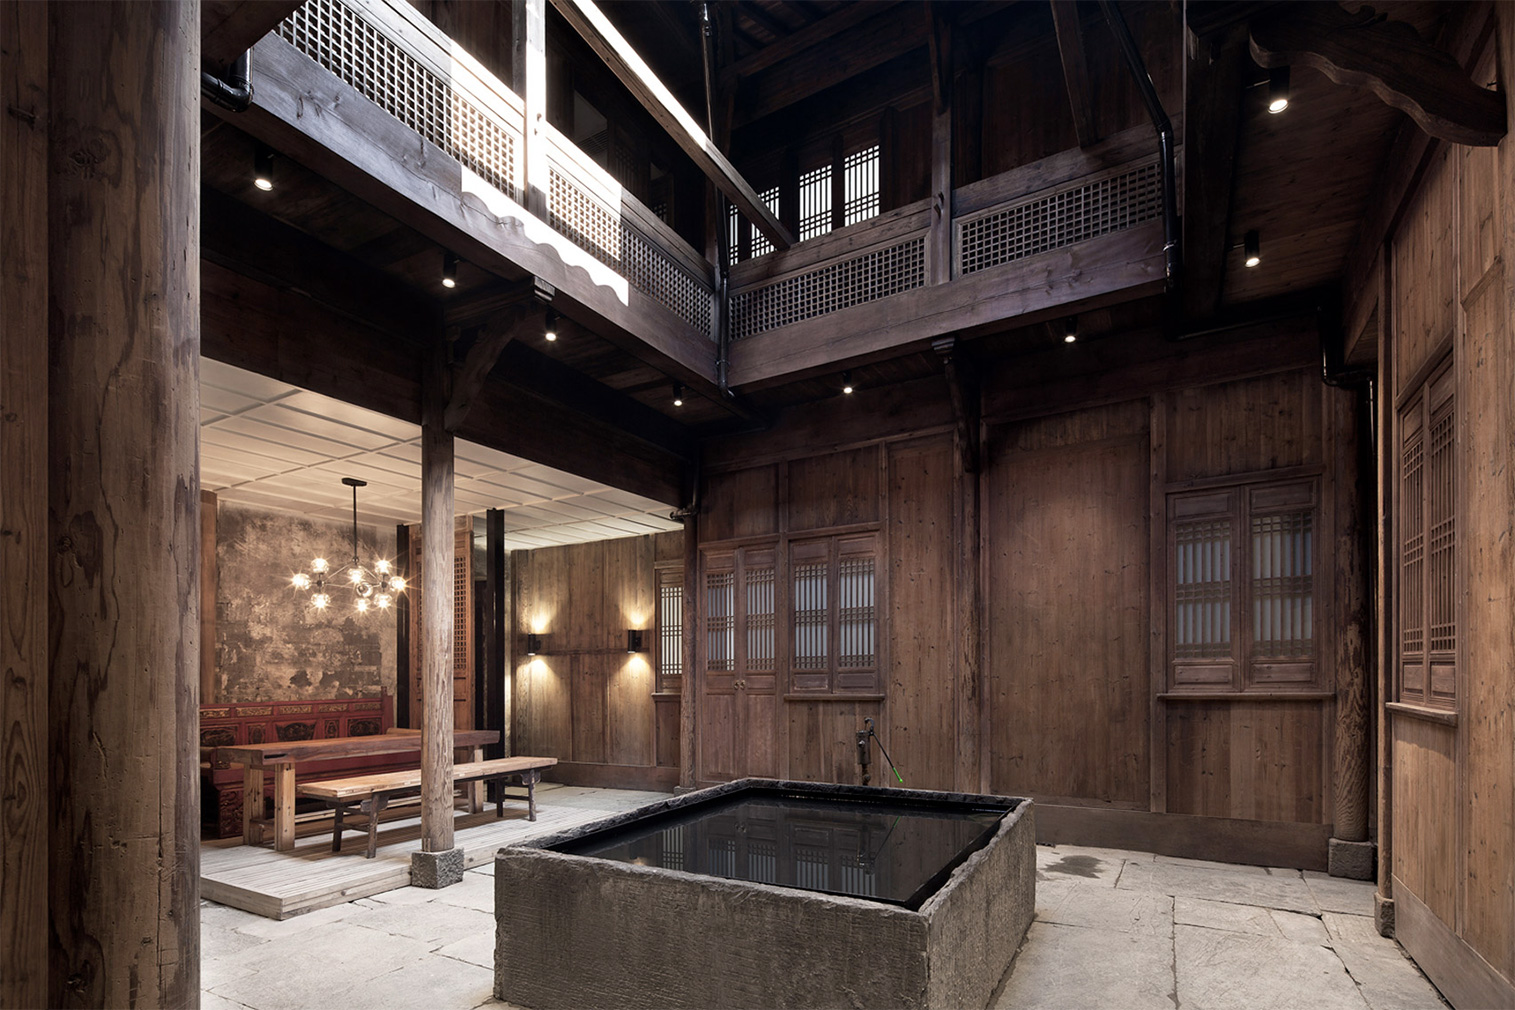 The most innovative adaptive reuse projects of 2019: Wuyuan Skywells hotel